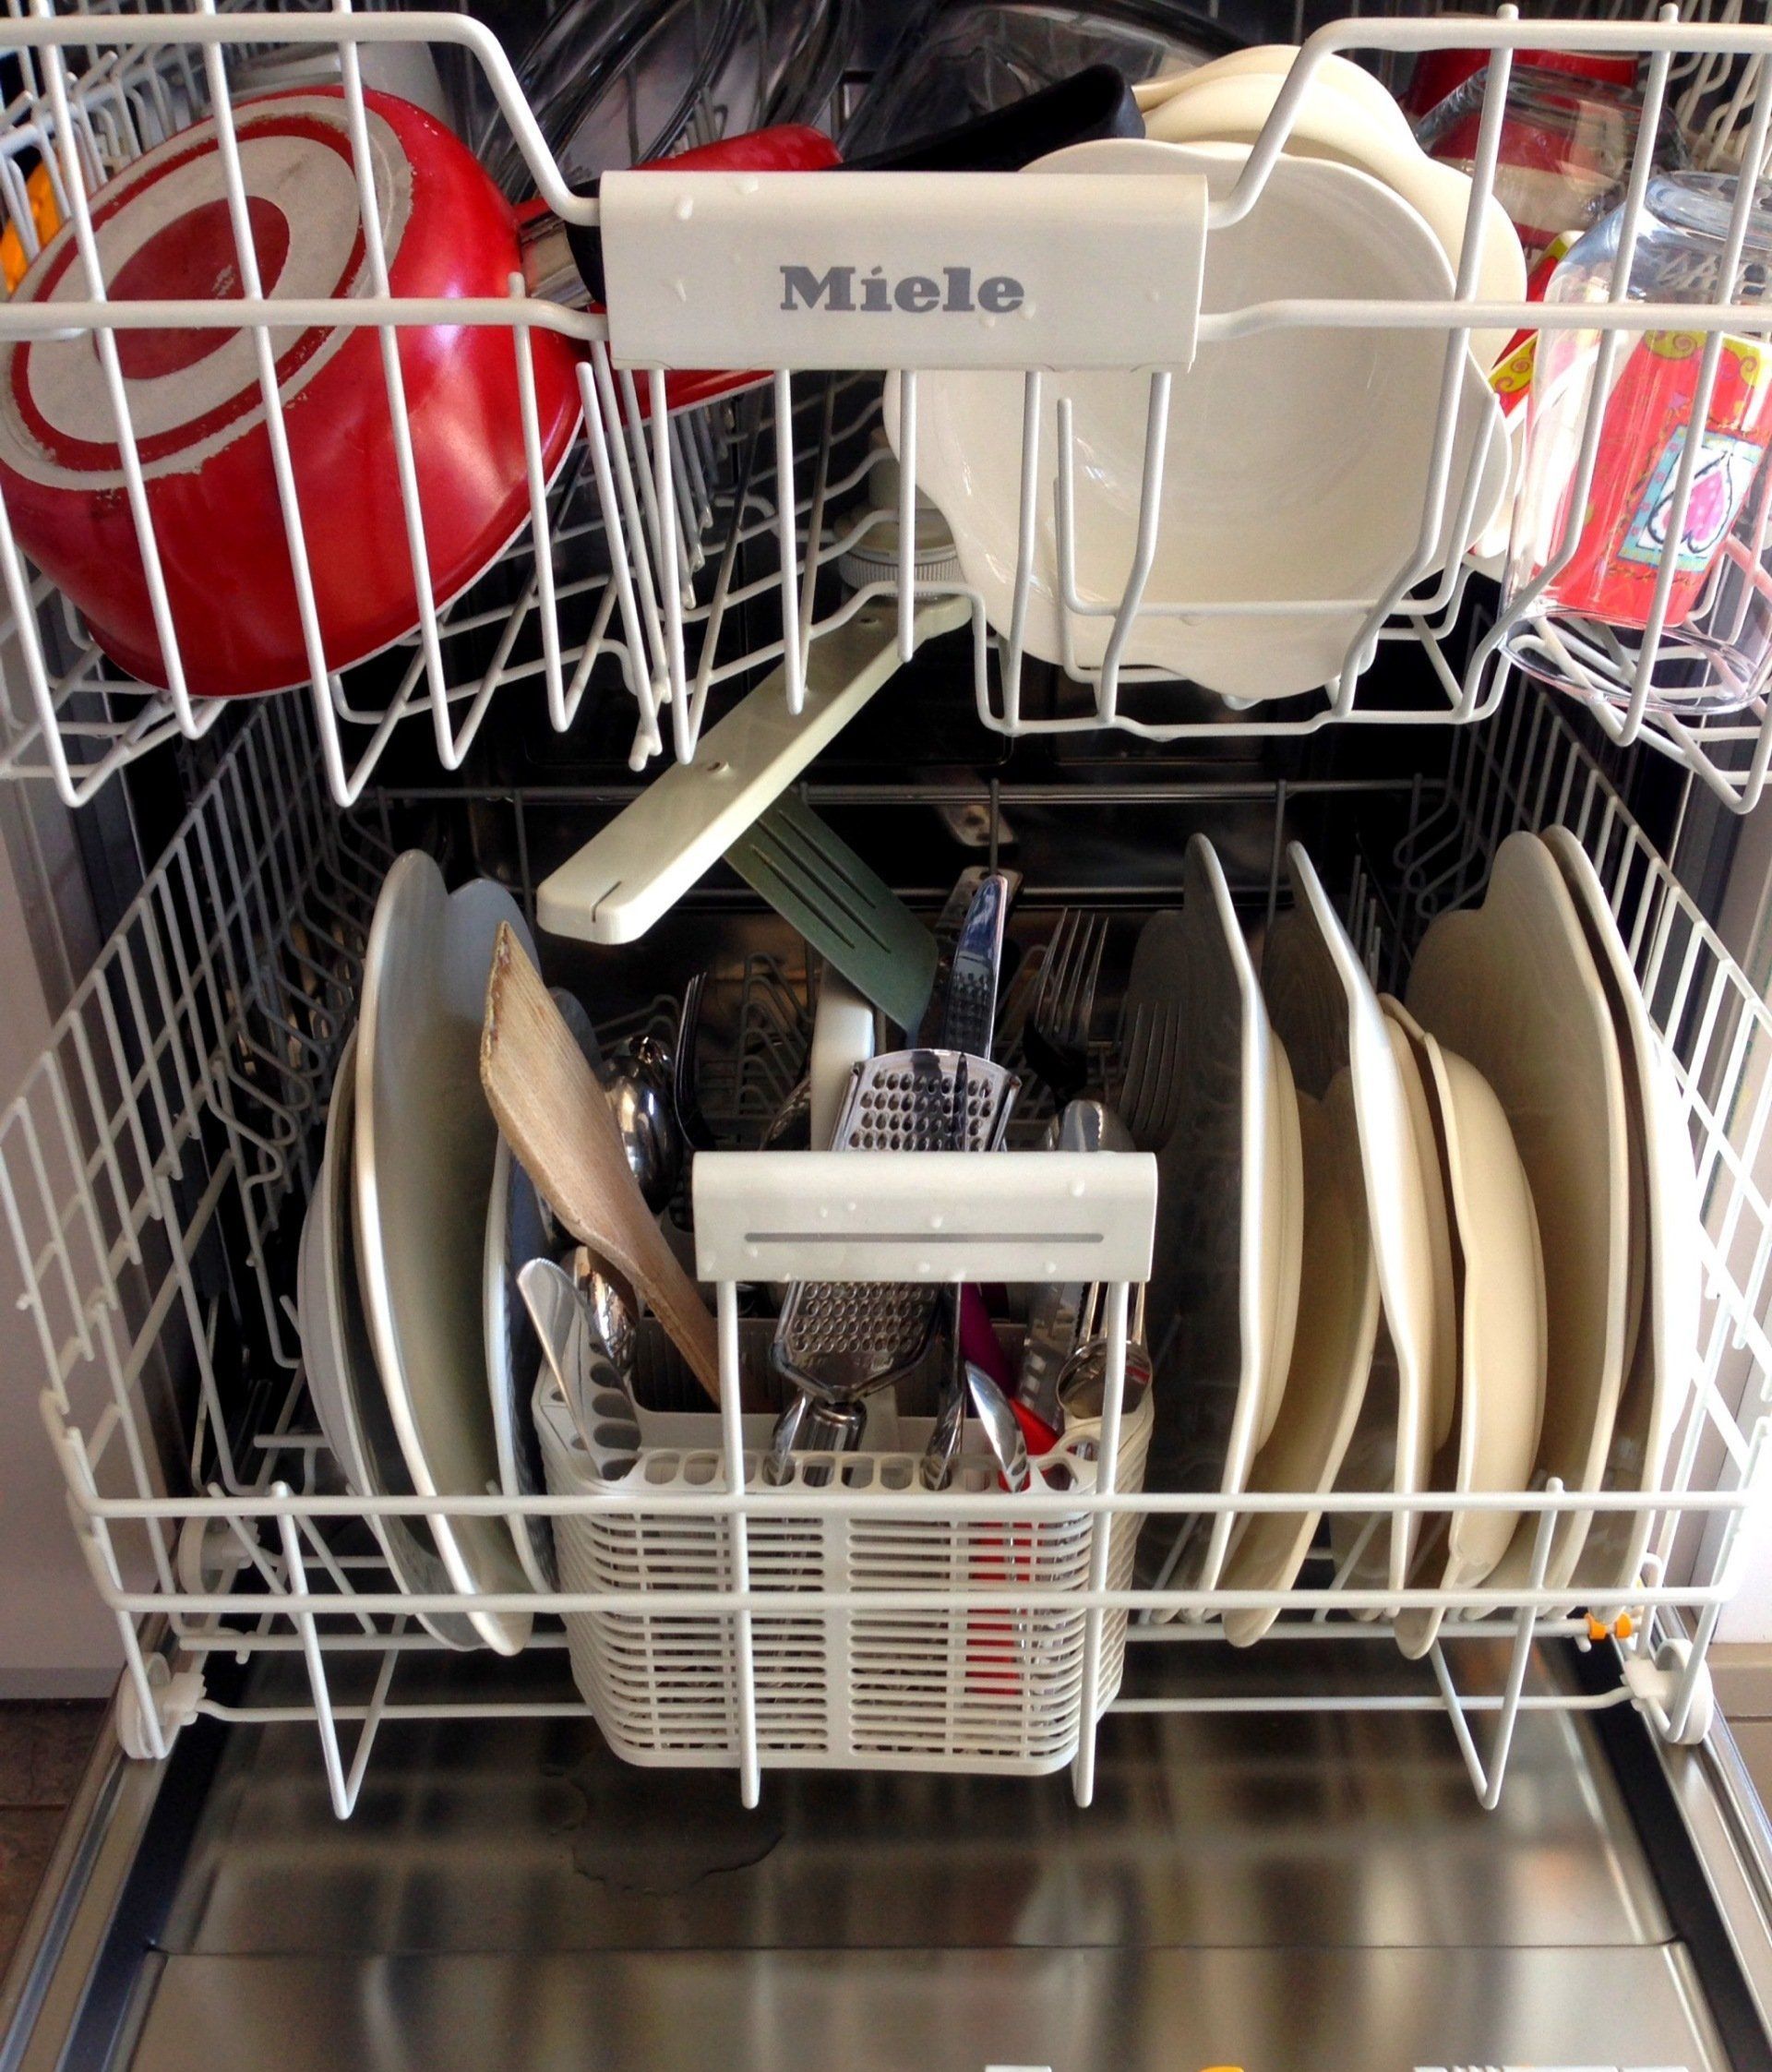 A dishwasher filled with sparkling clean dishes arranged neatly in rows, ready to be put away.